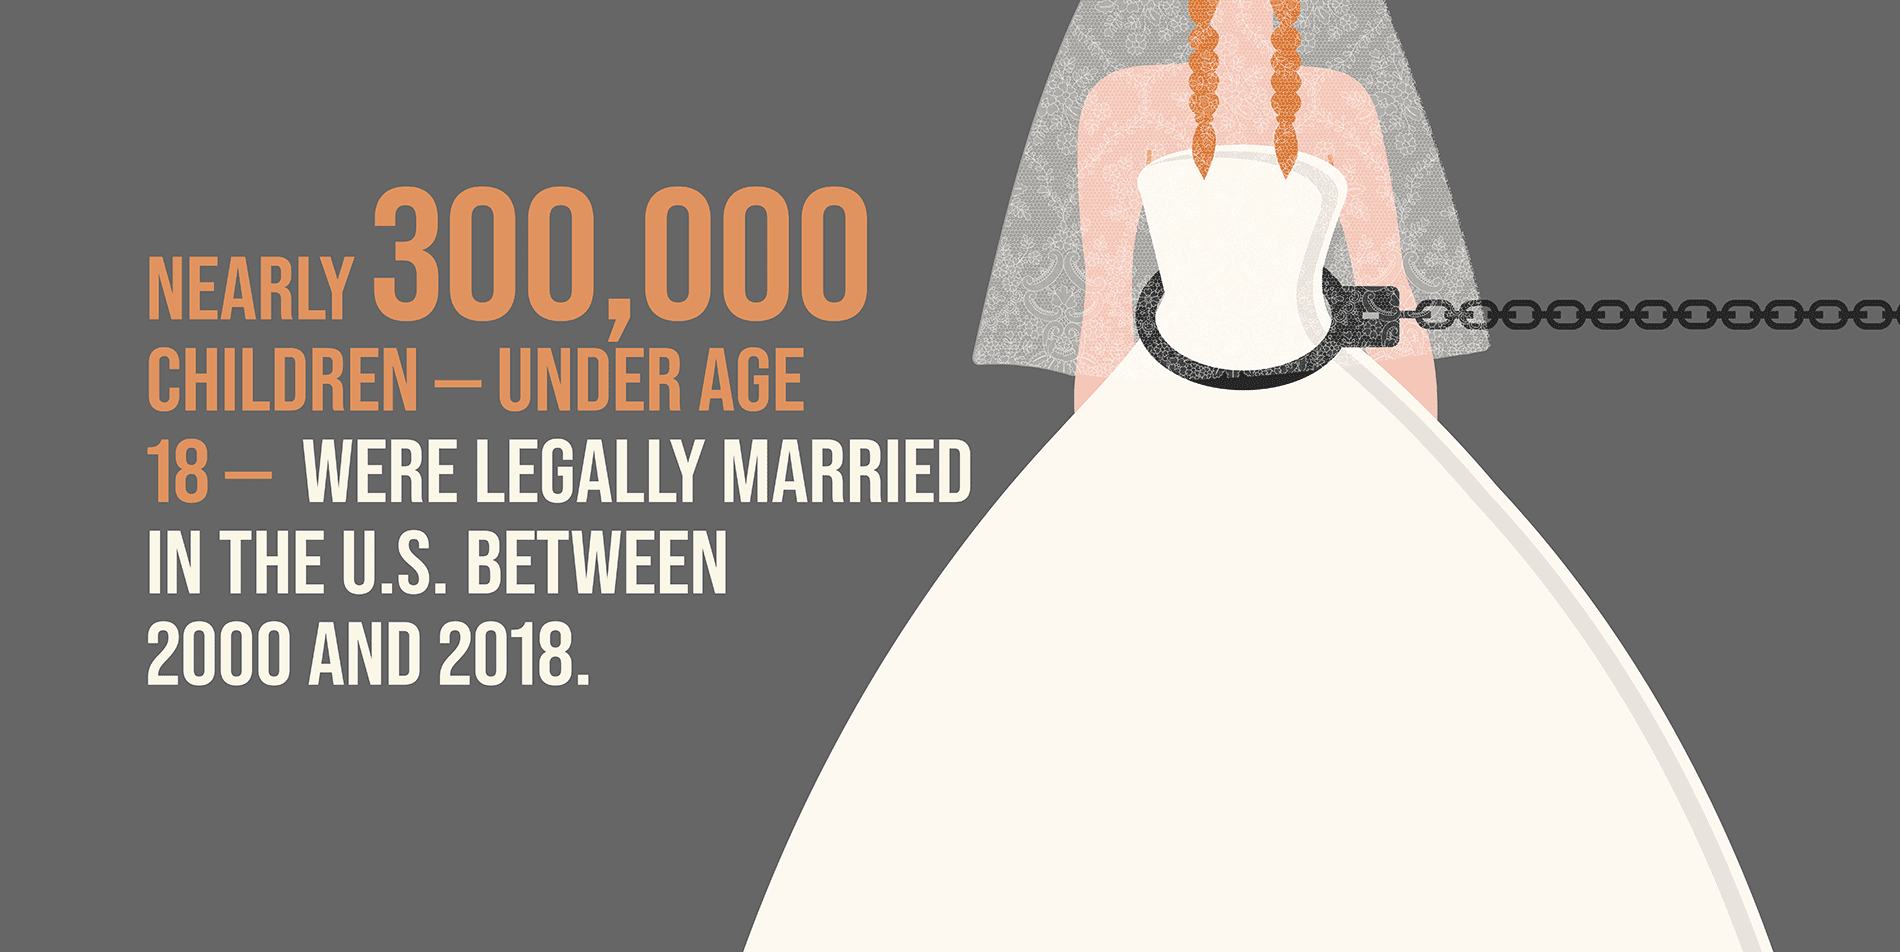 United States Child Marriage Problem Study Findings (April 2021)